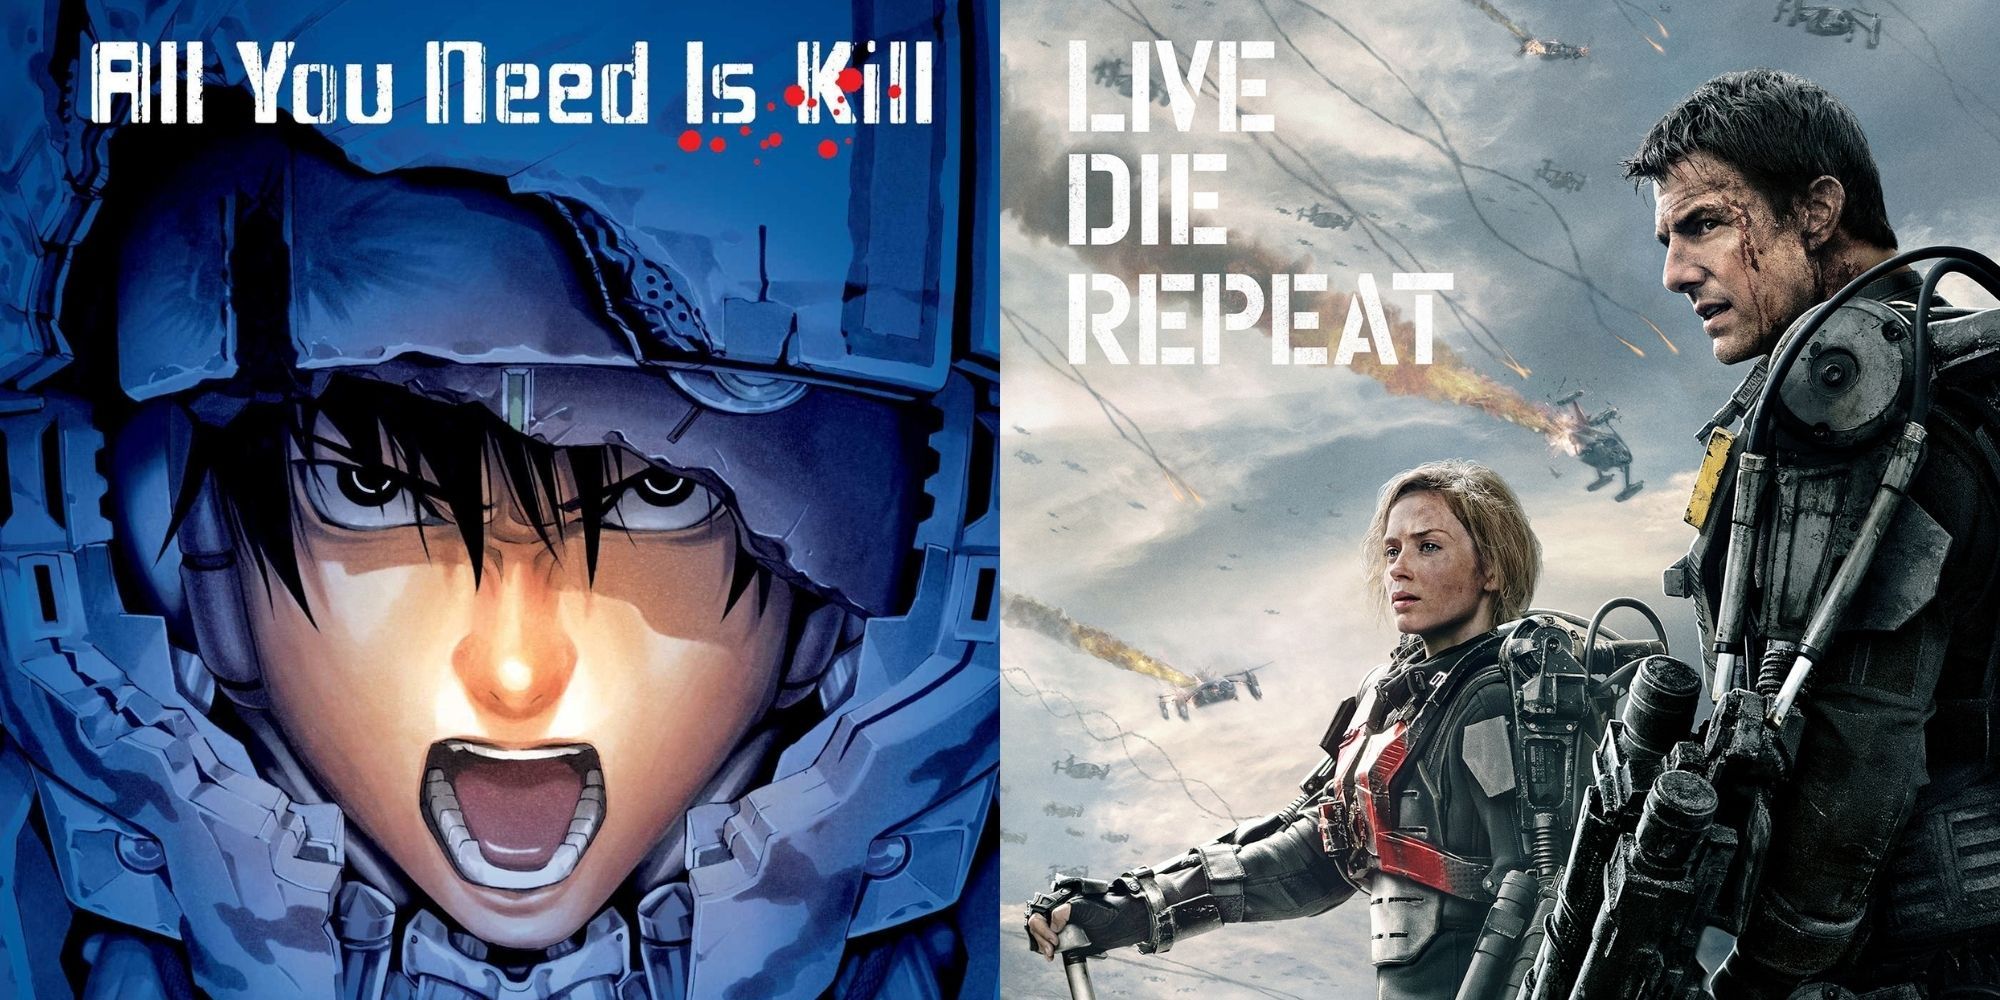 All You Need Is Kill manga and Edge of Tomorrow live-action